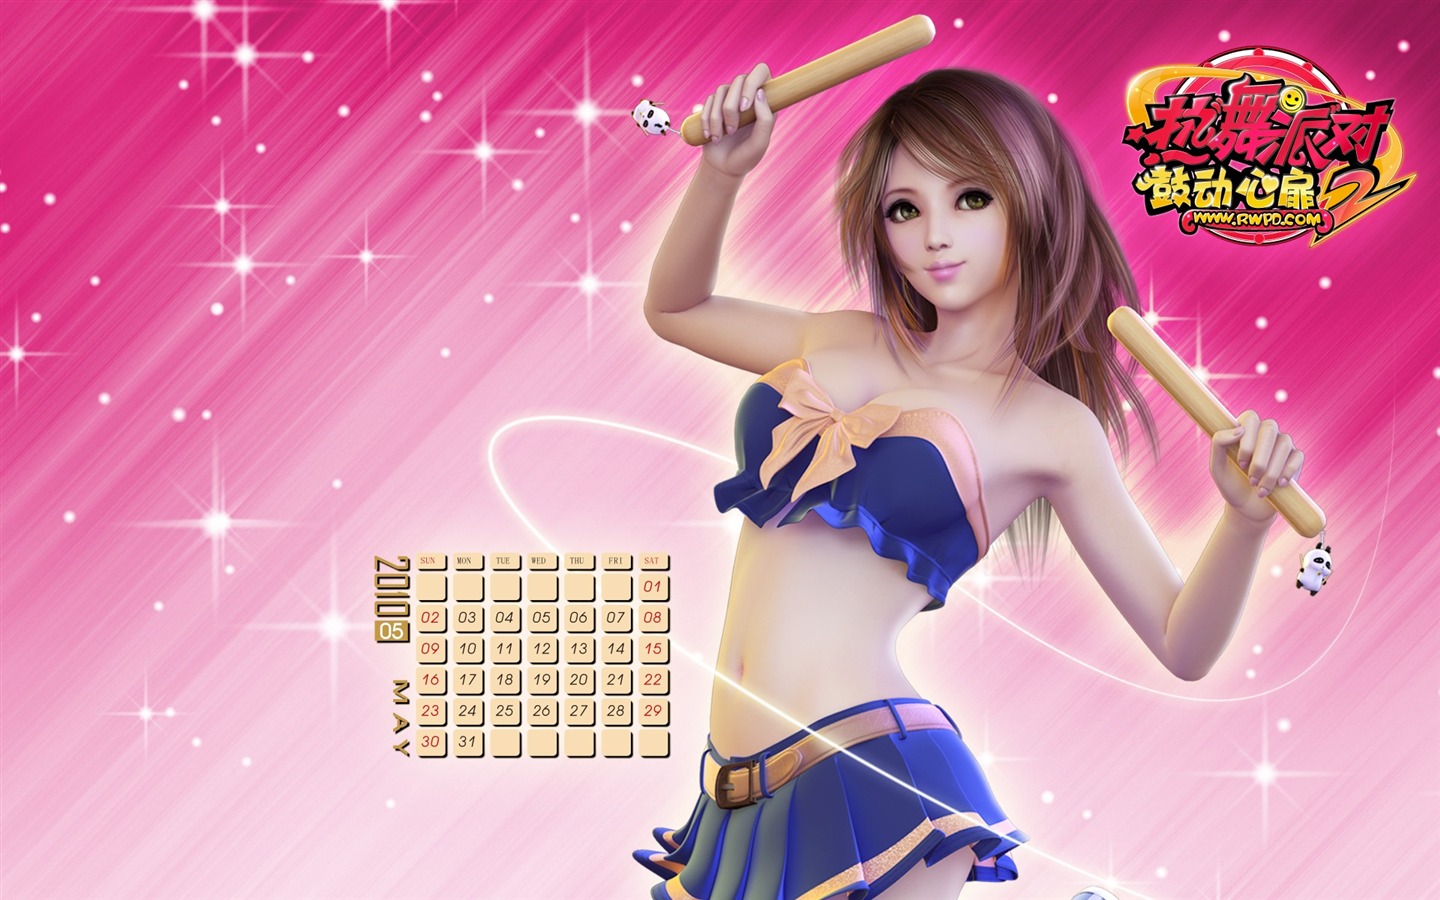 Online game Hot Dance Party II official wallpapers #24 - 1440x900